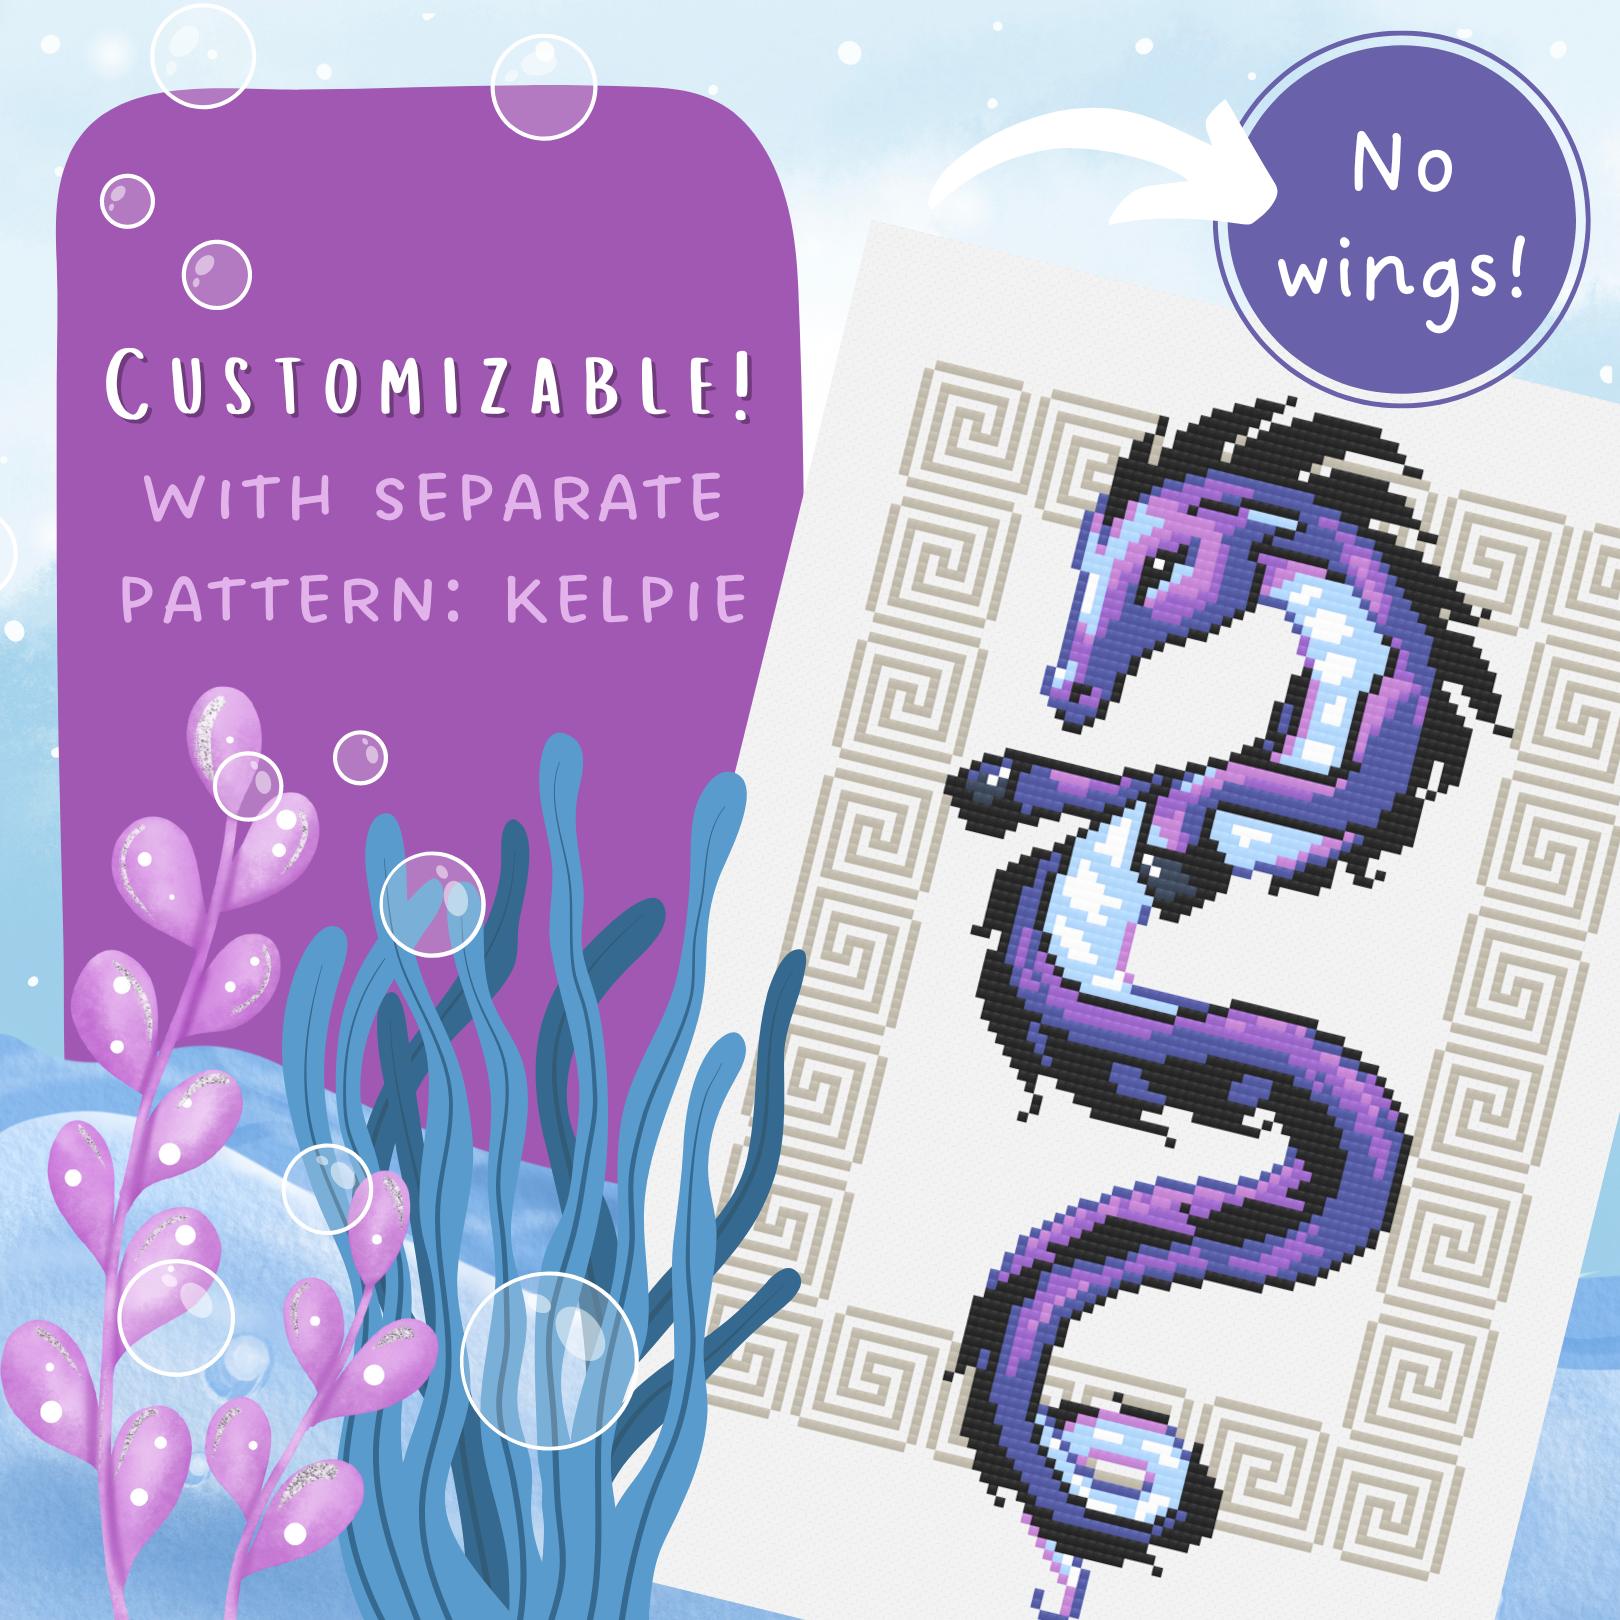 This pattern is customizable. You have a choice of two: you can stitch a dragon with wings, or a kelpie without wings. The kelpie derives from Irish and Scottish mythology. It is depicted here as a rendering.